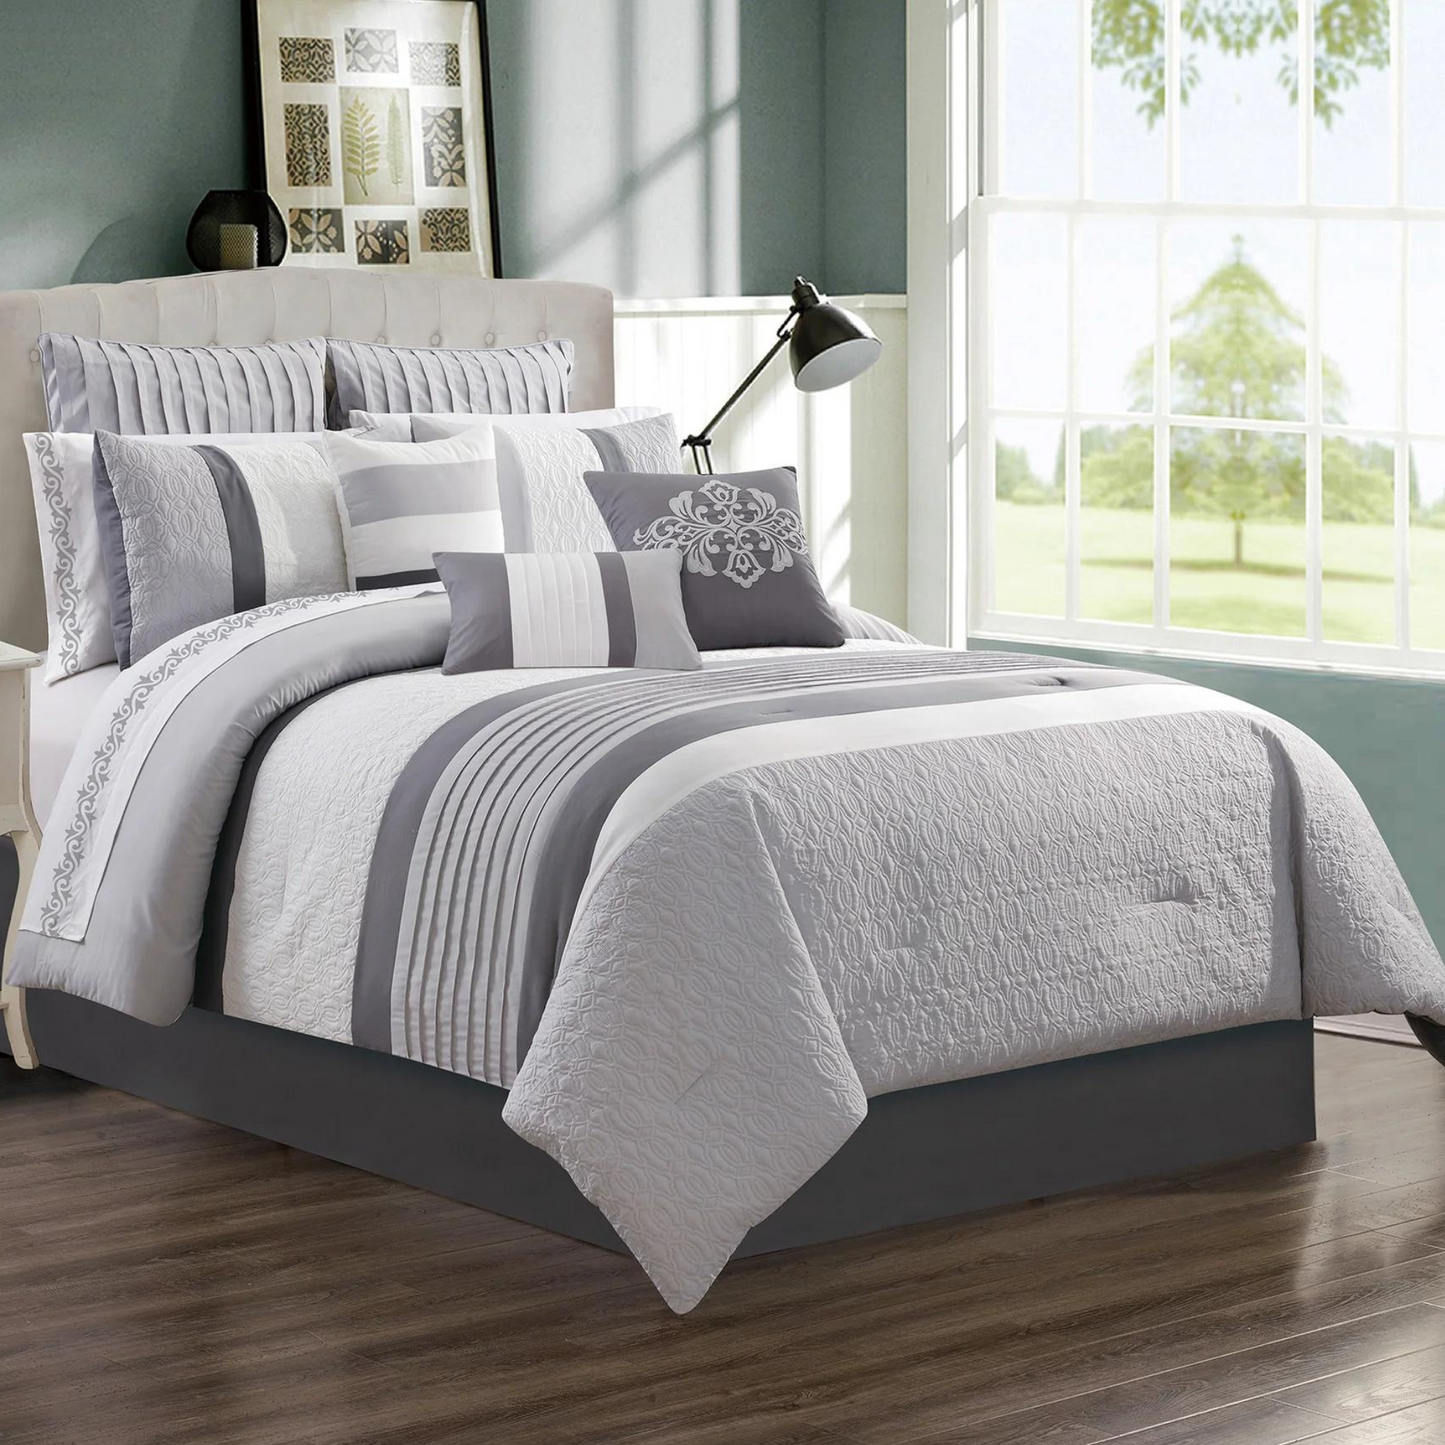 Grey 7 Piece Comforter Set (Includes 3 Cushions)